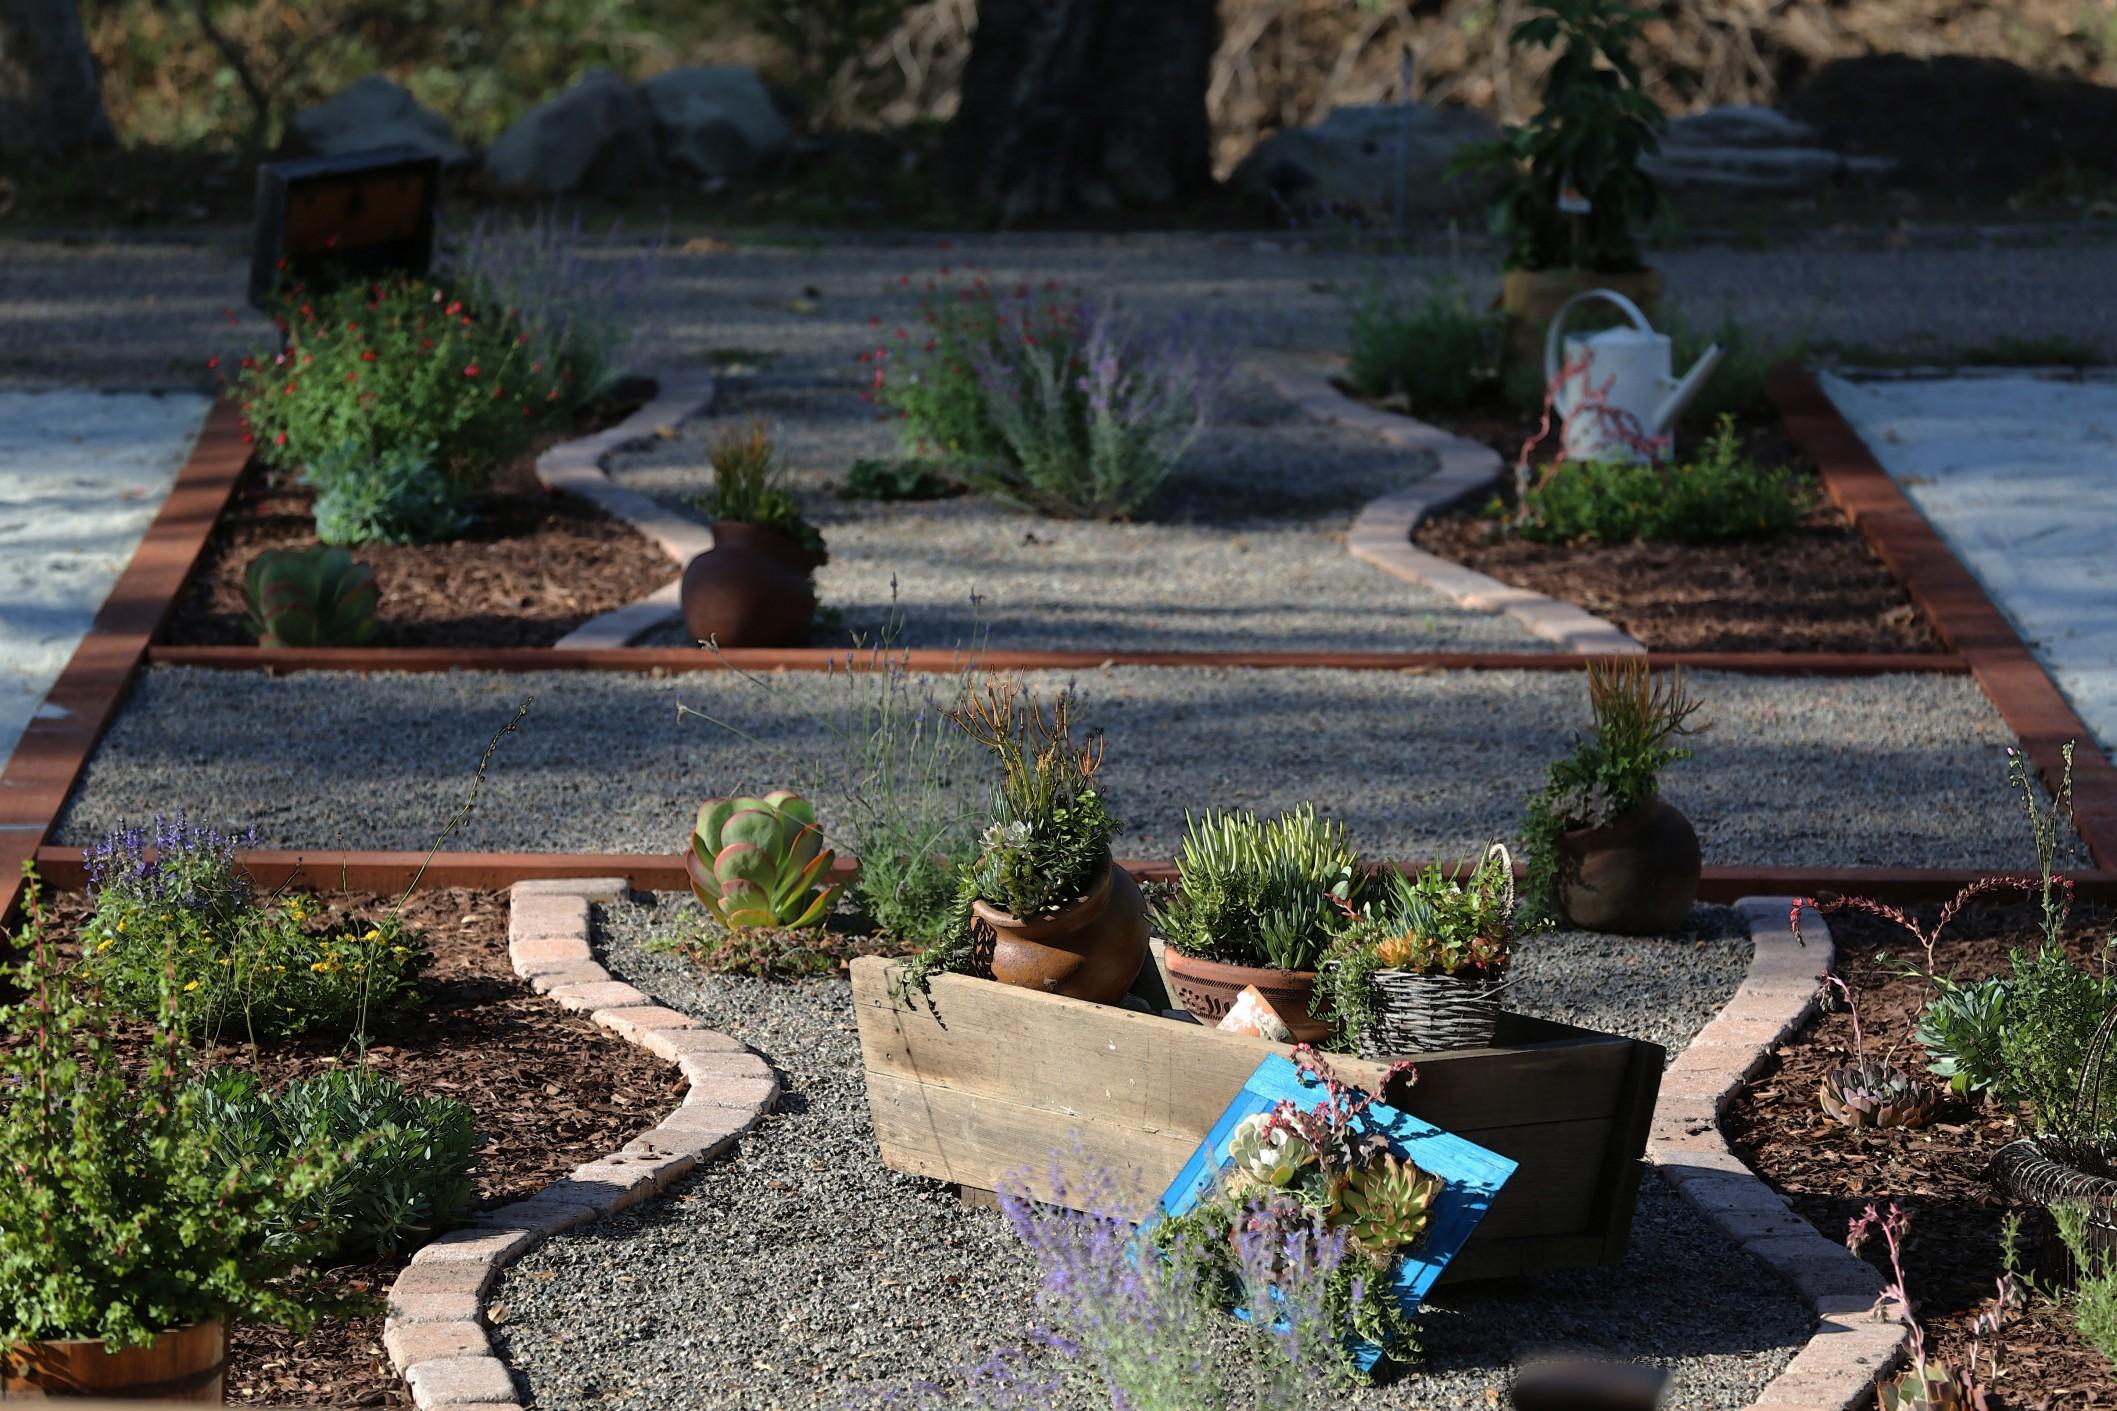 Flat rocks, gravel, and stones with small plants set into it for a rocky, rustic garden.